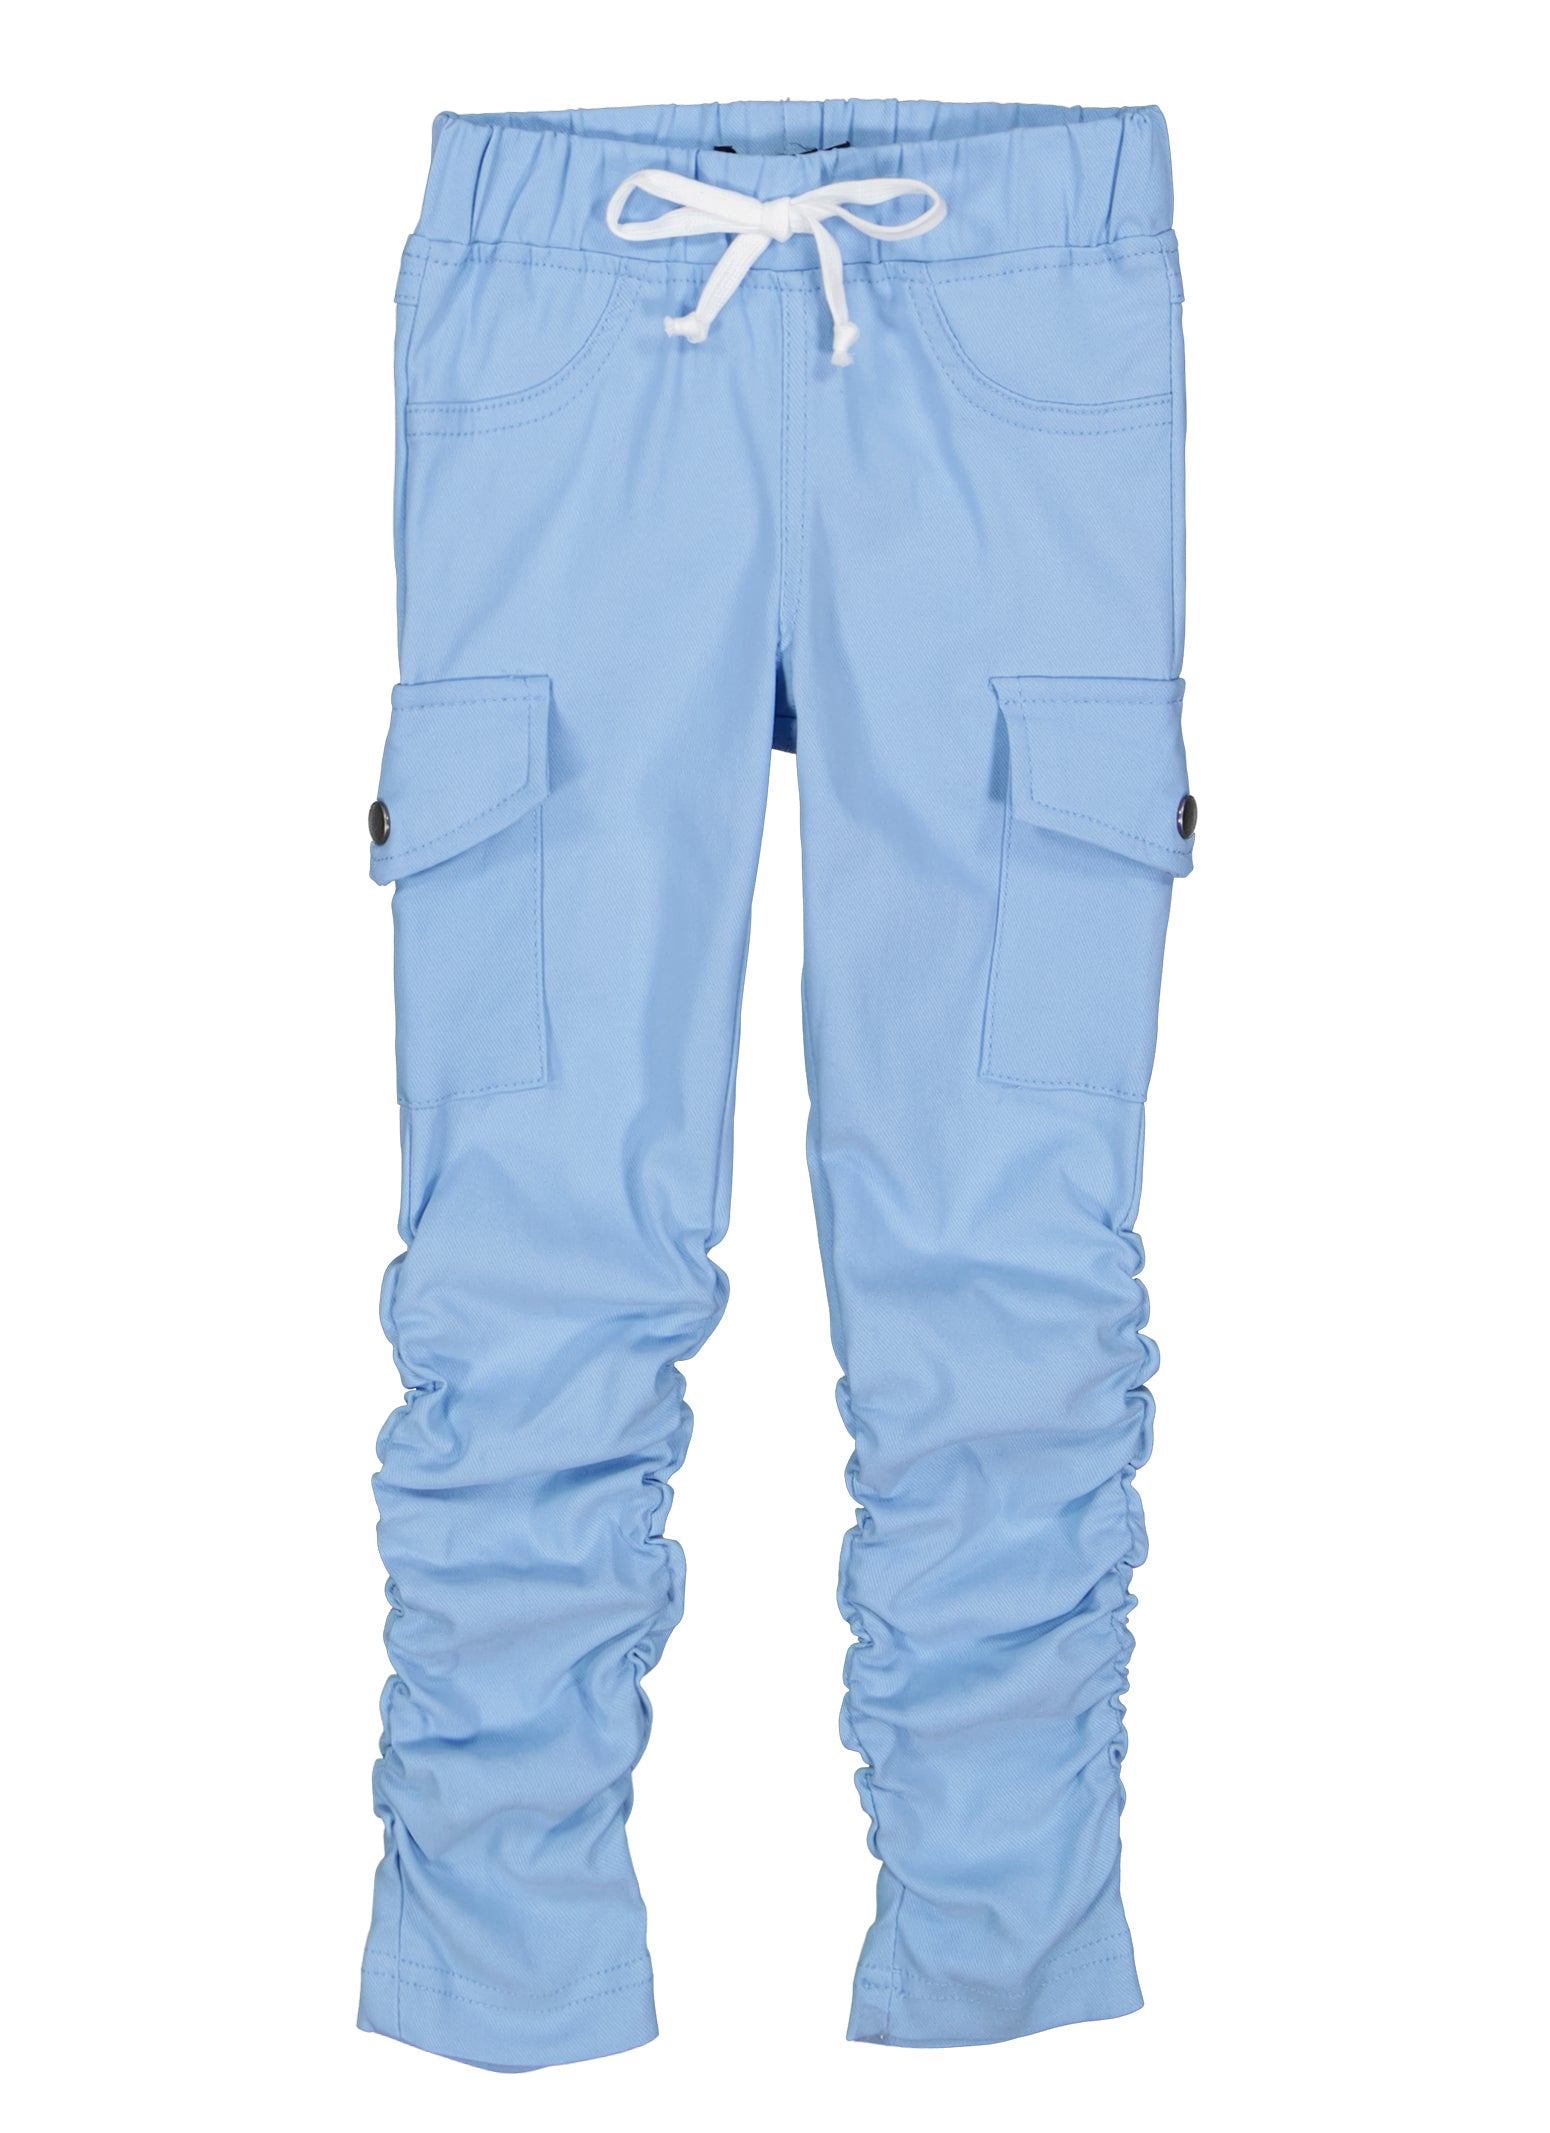 Buy R2G Girls Denim Joggers/Track Pants/Jeans Pants (DStar, Blue, 11-12  Years) at Amazon.in